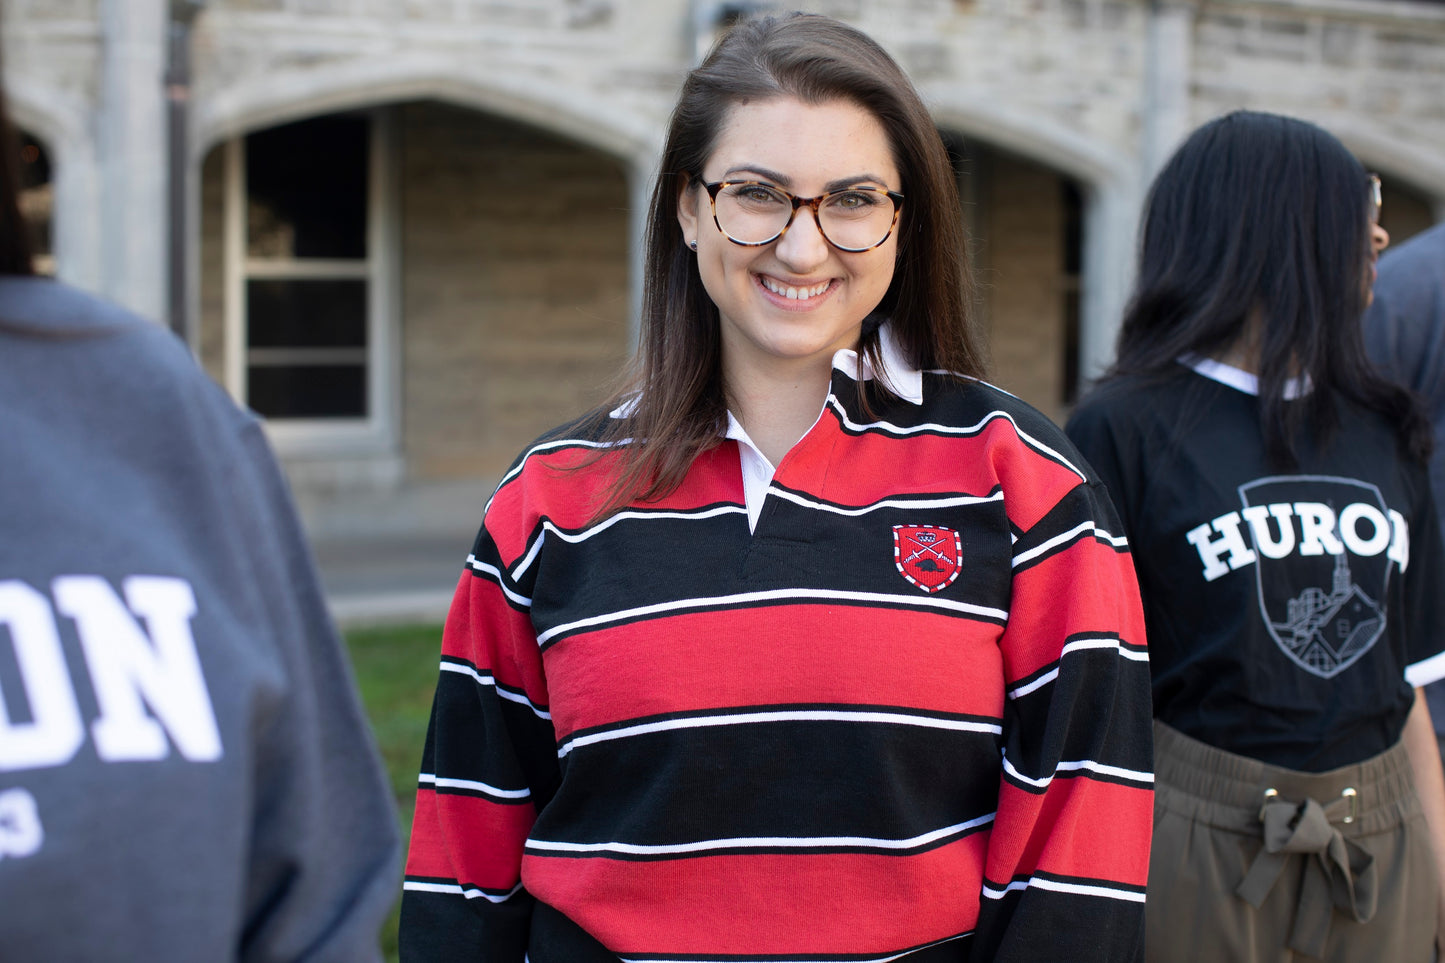 Sale: Rugby Sweatshirt - Red and Black Striped